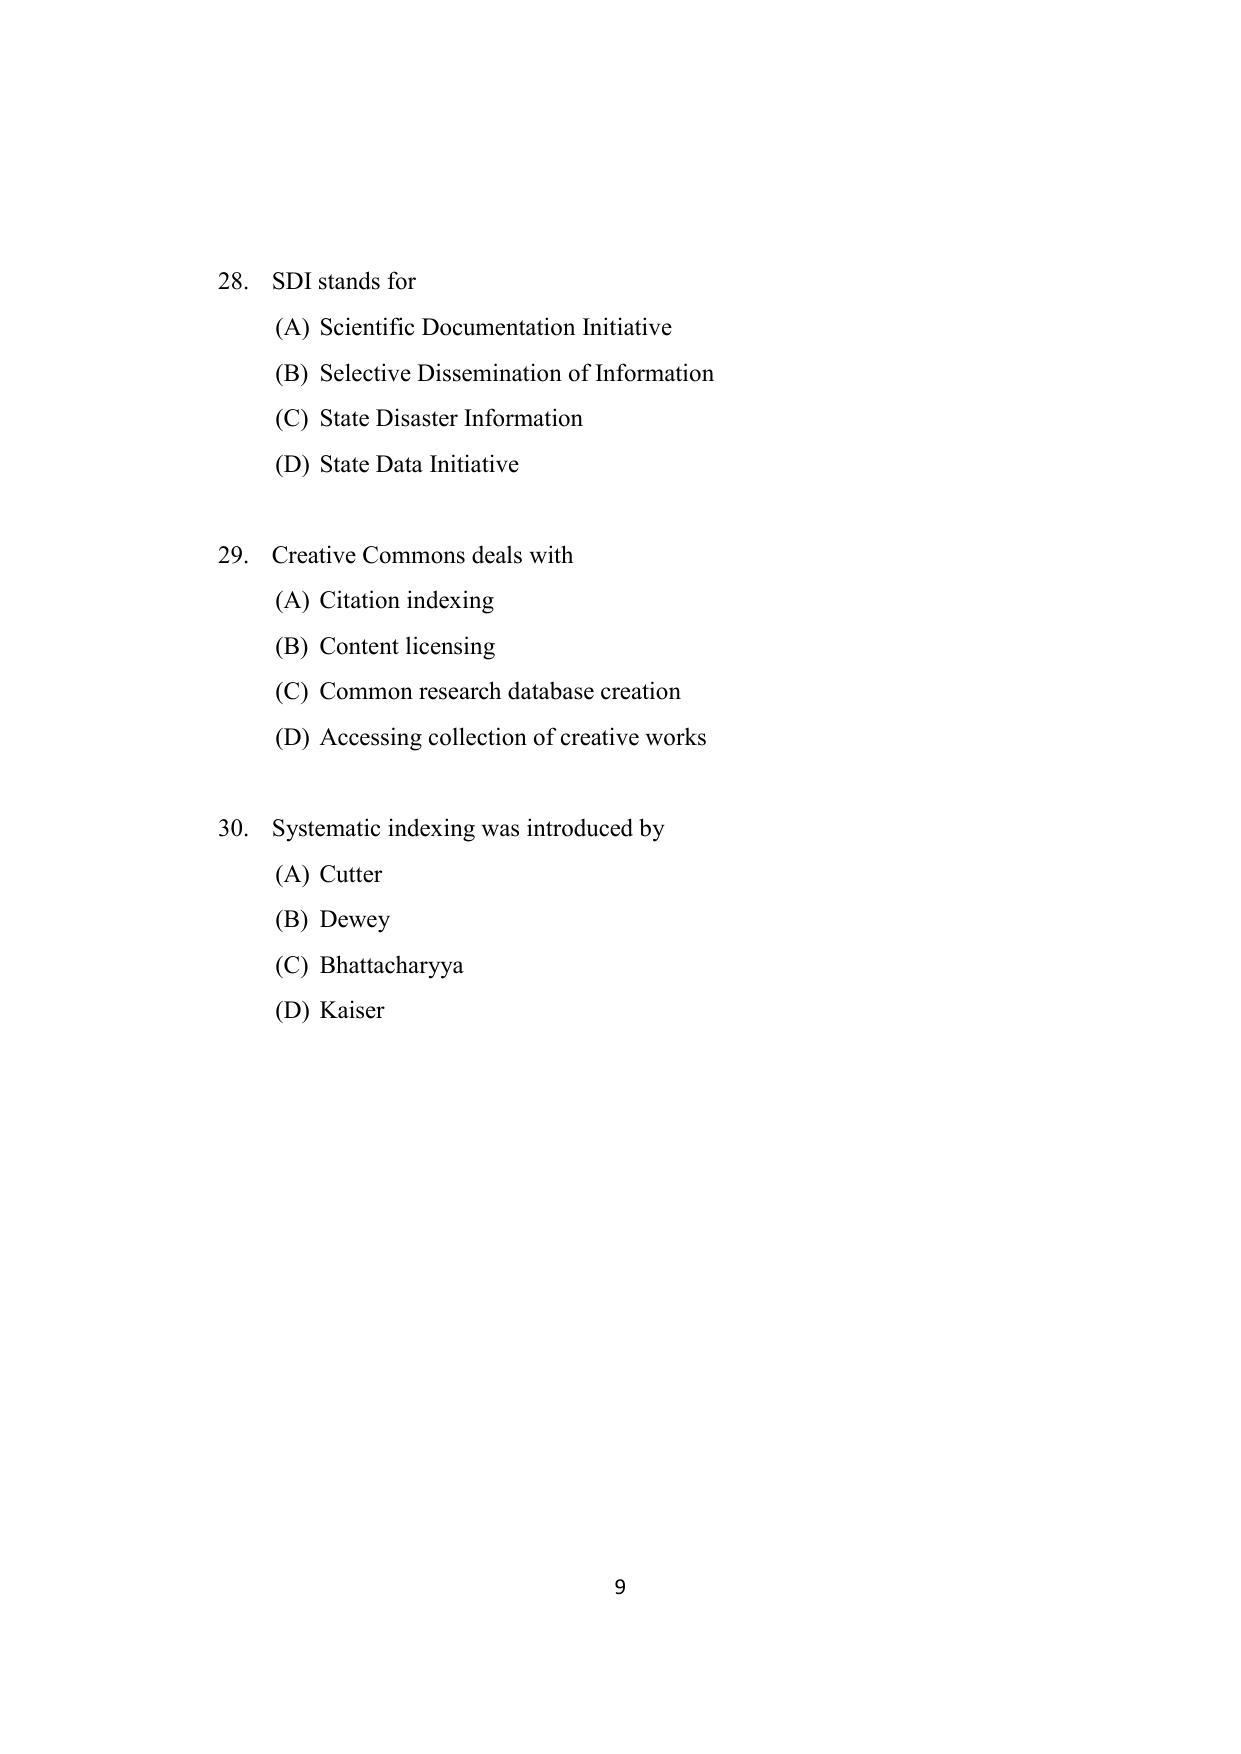 ISI Admission Test JRF in Library and Information Science LIA 2021 Sample Paper - Page 9